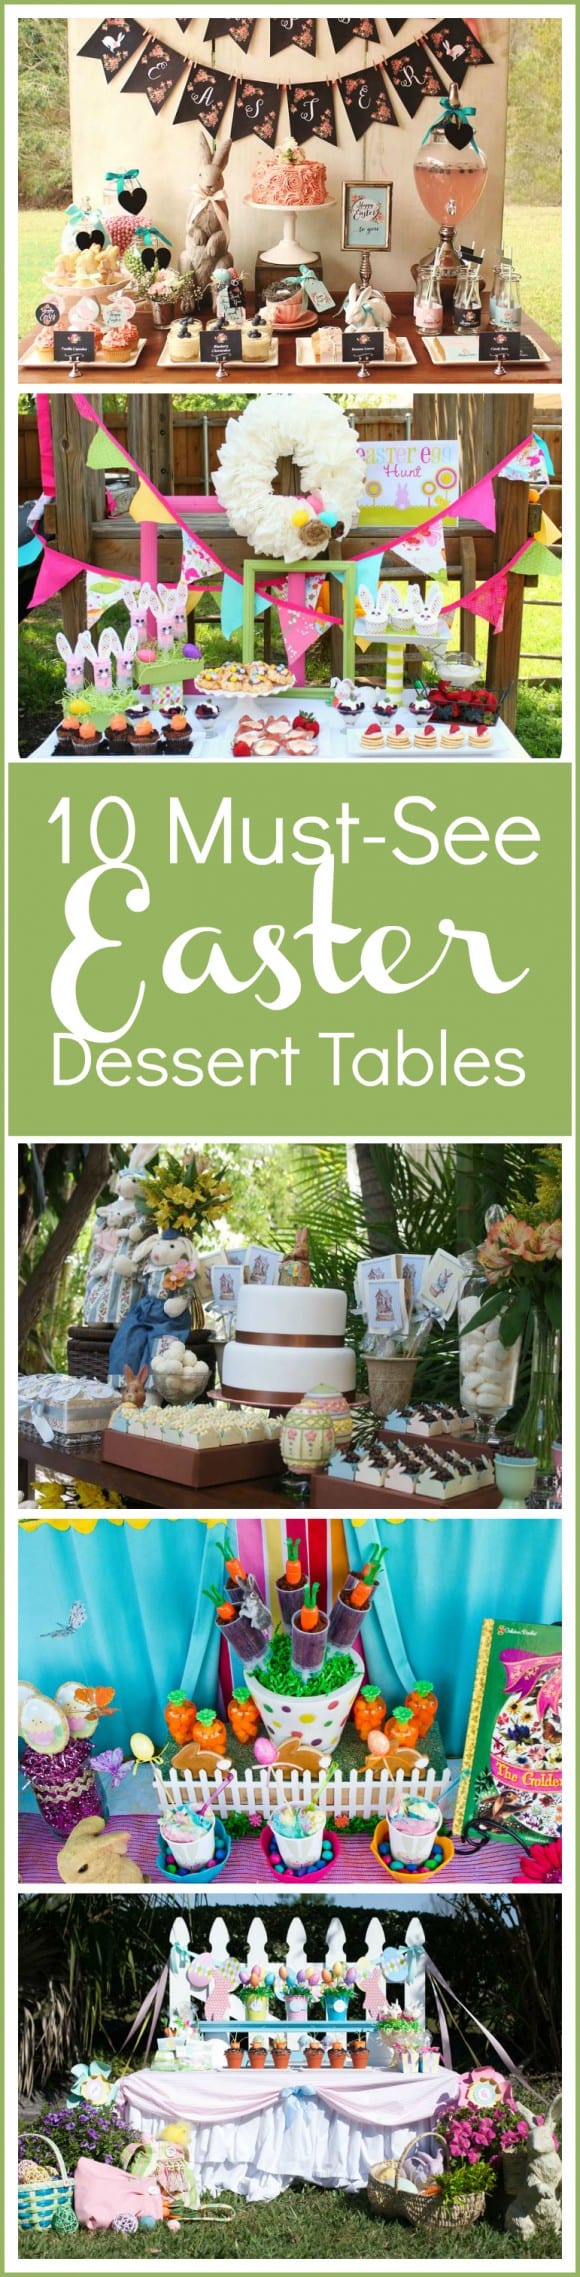 Easter Dessert Tables | CatchMyParty.com